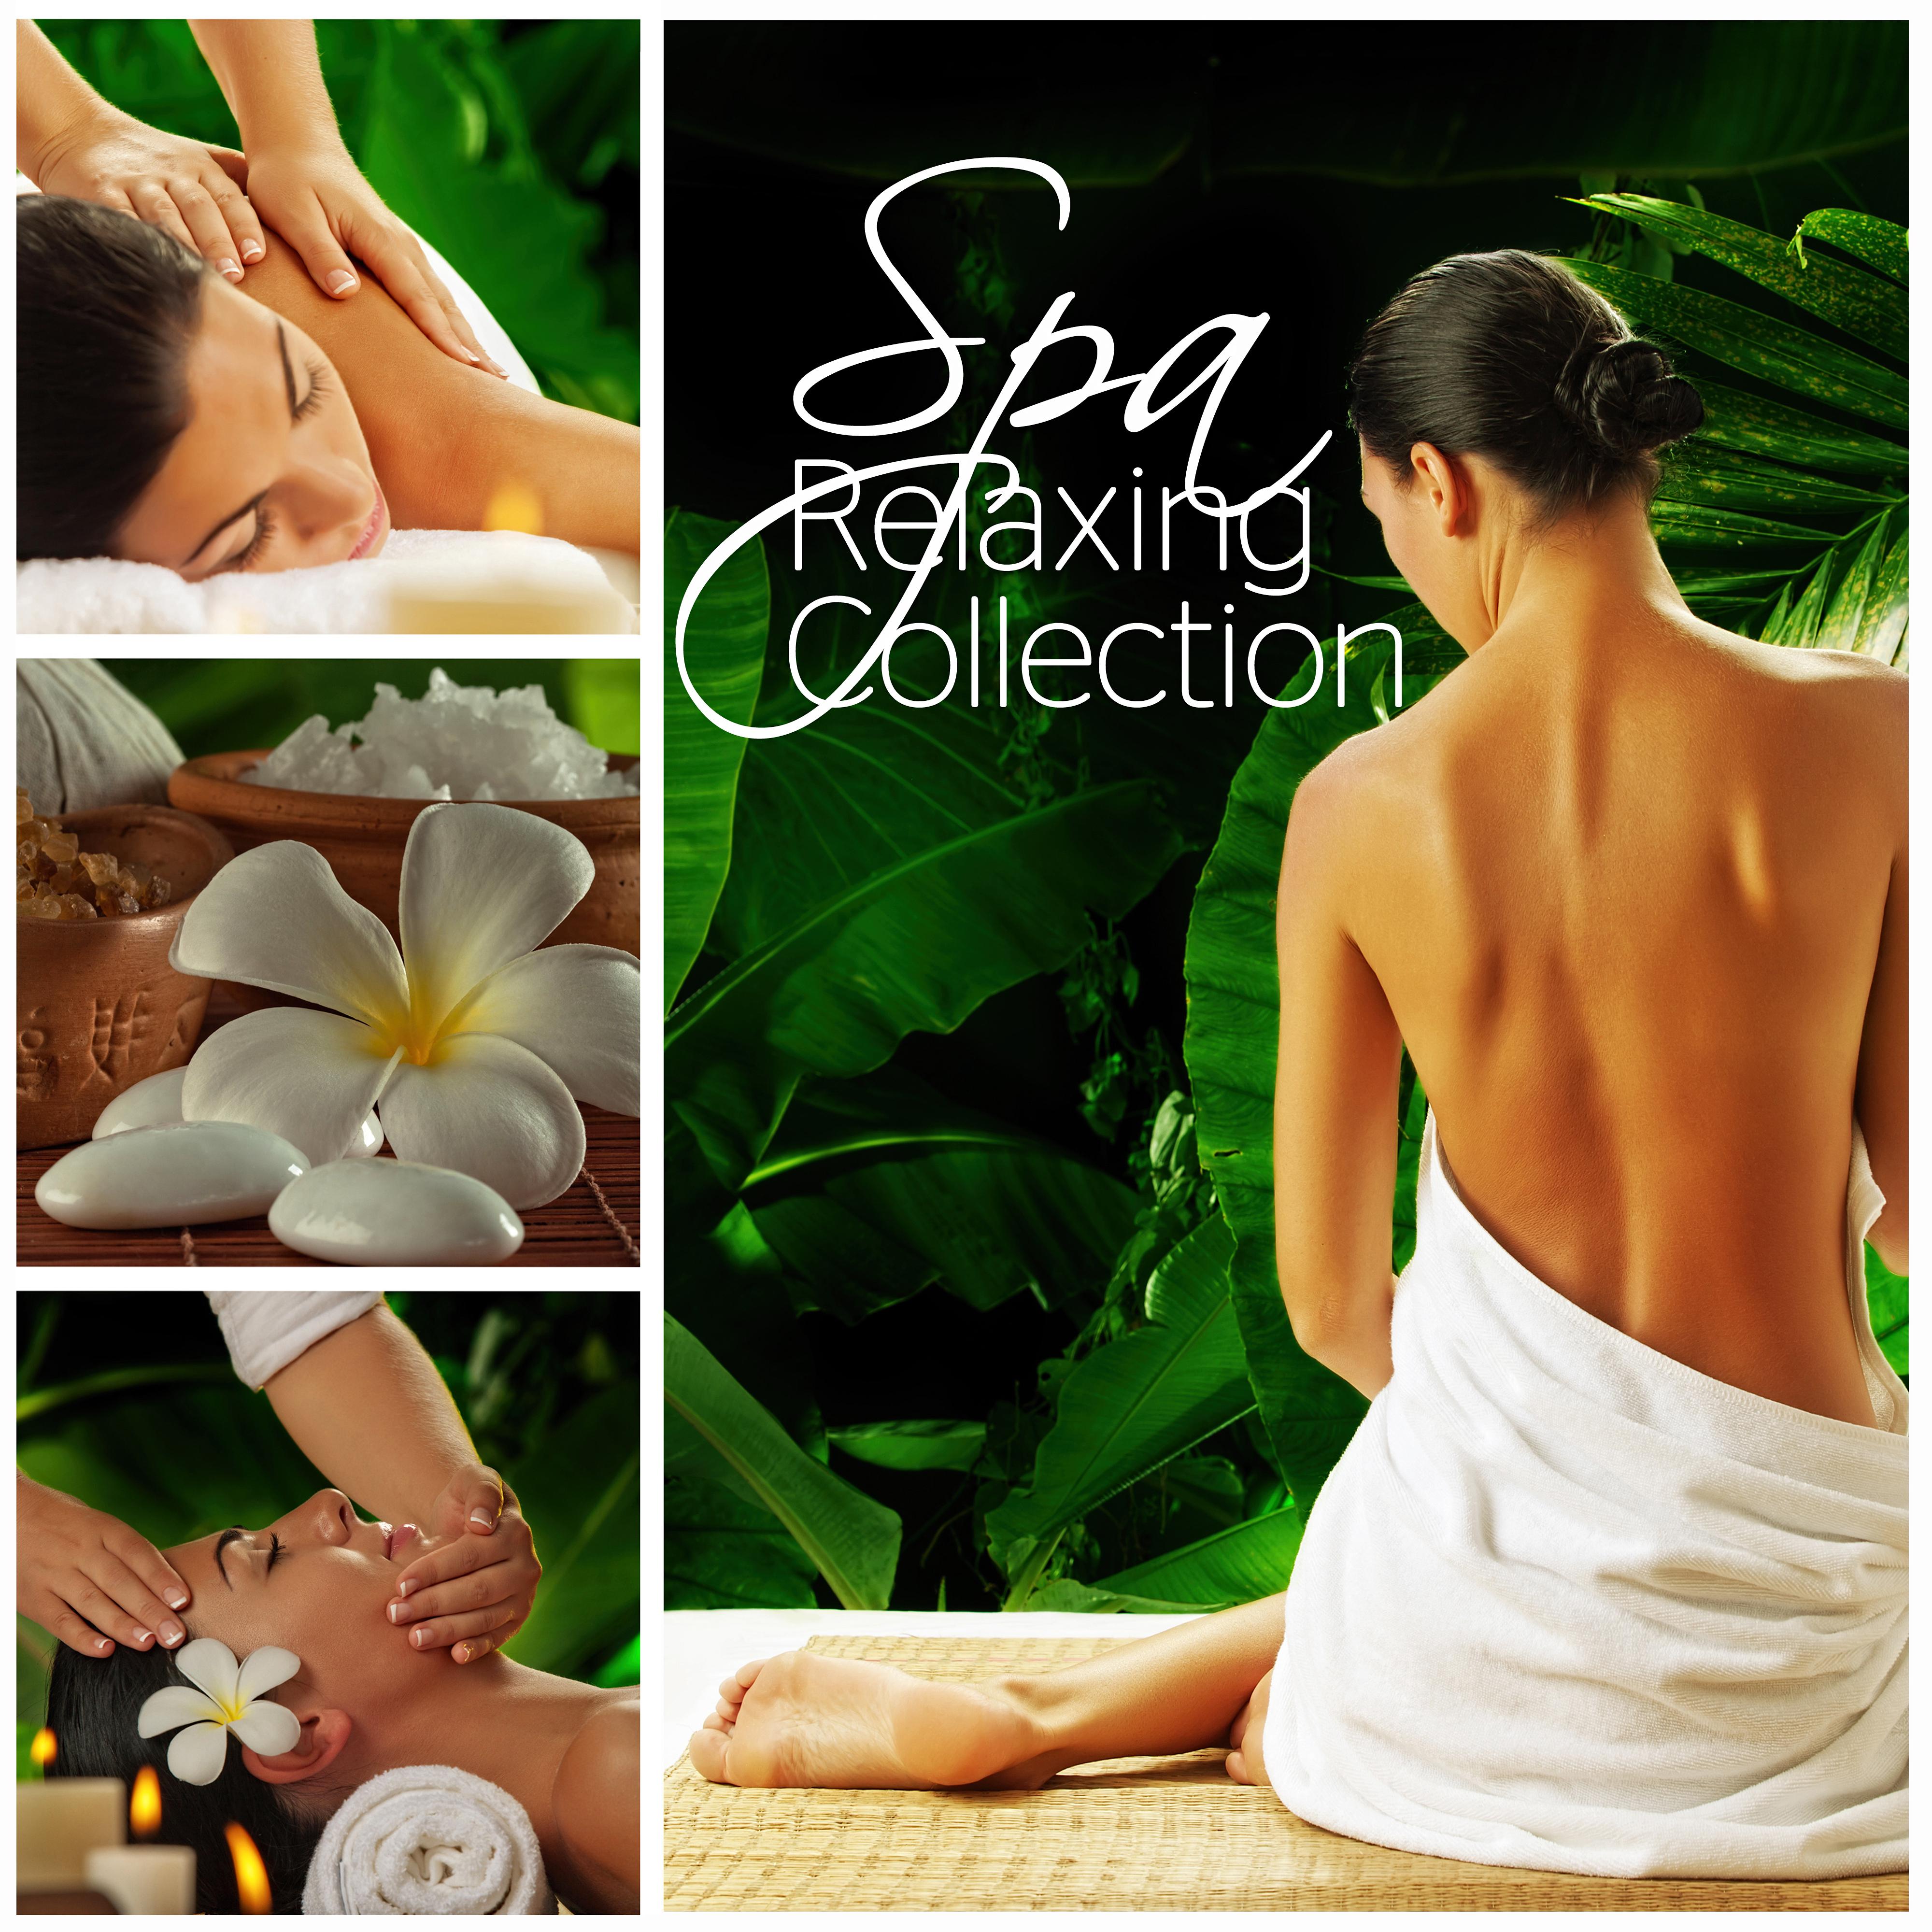 Spa Relaxing Collection – Bliss Spa, Time for Me, Easy Listening, Nature Sounds, Calm Down, Gentle Ambient Music